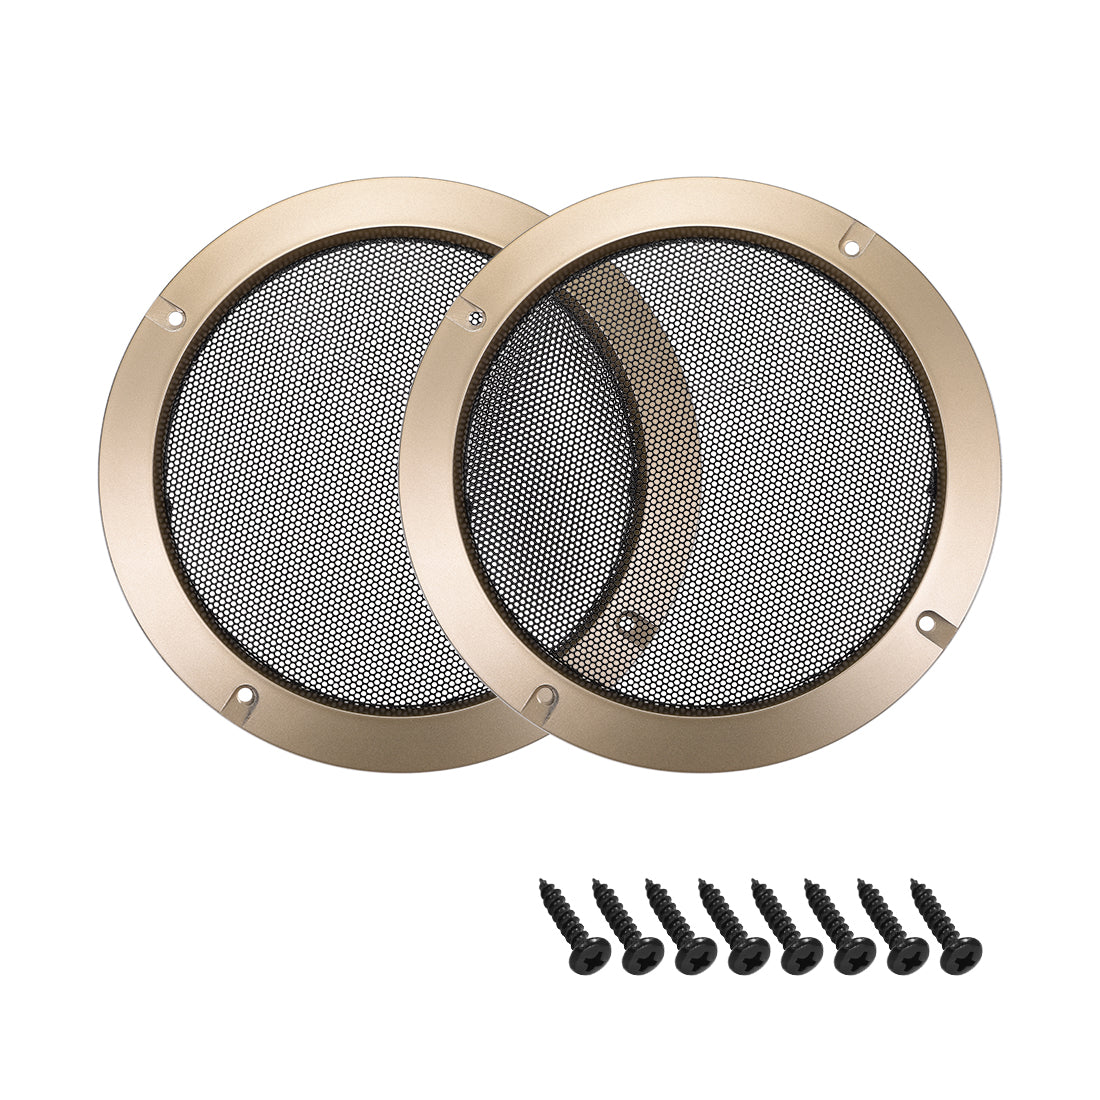 uxcell Uxcell 2pcs 6.5" Speaker Grill Mesh Decorative Circle Subwoofer Guard Protector Cover for 6.5"  Mounting Hole Diagonal Distance